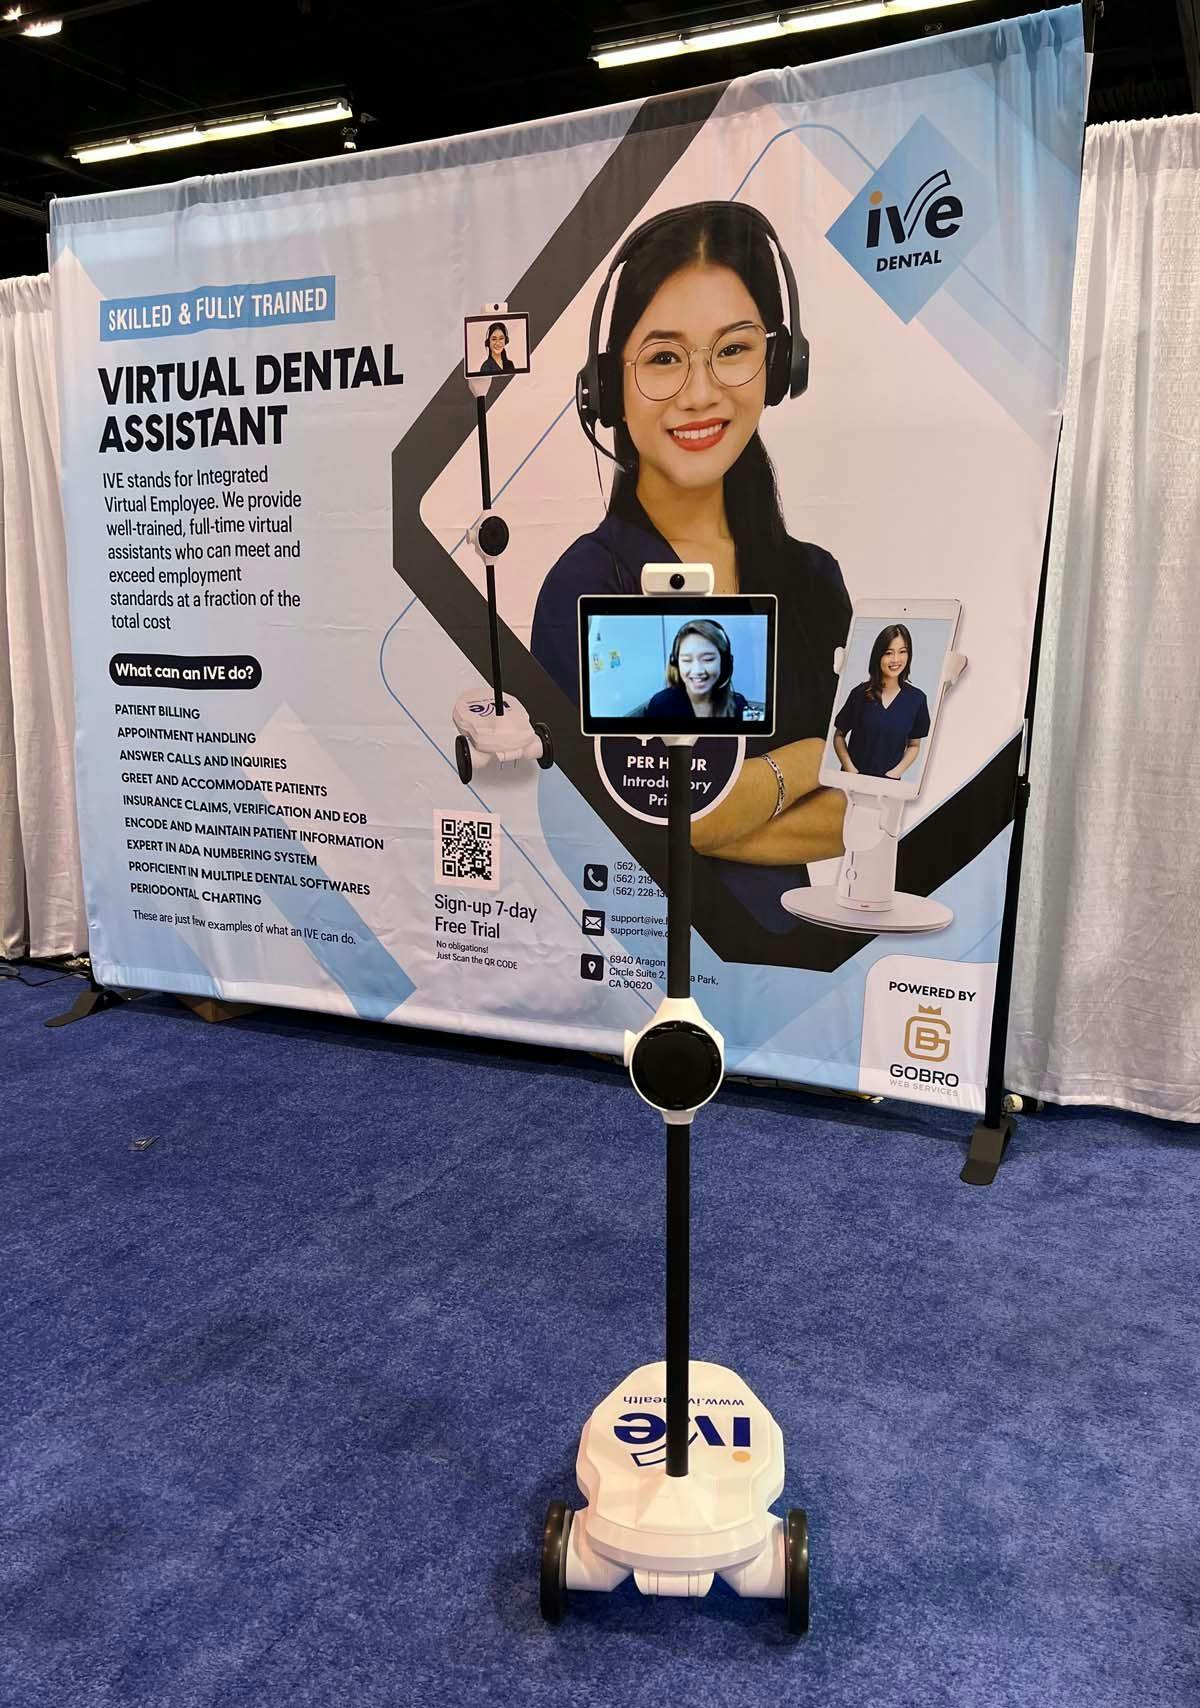 IVE Dental, part of GOBRO Web Services, demonstrated its trained virtual assistant on the tradeshow floor. 